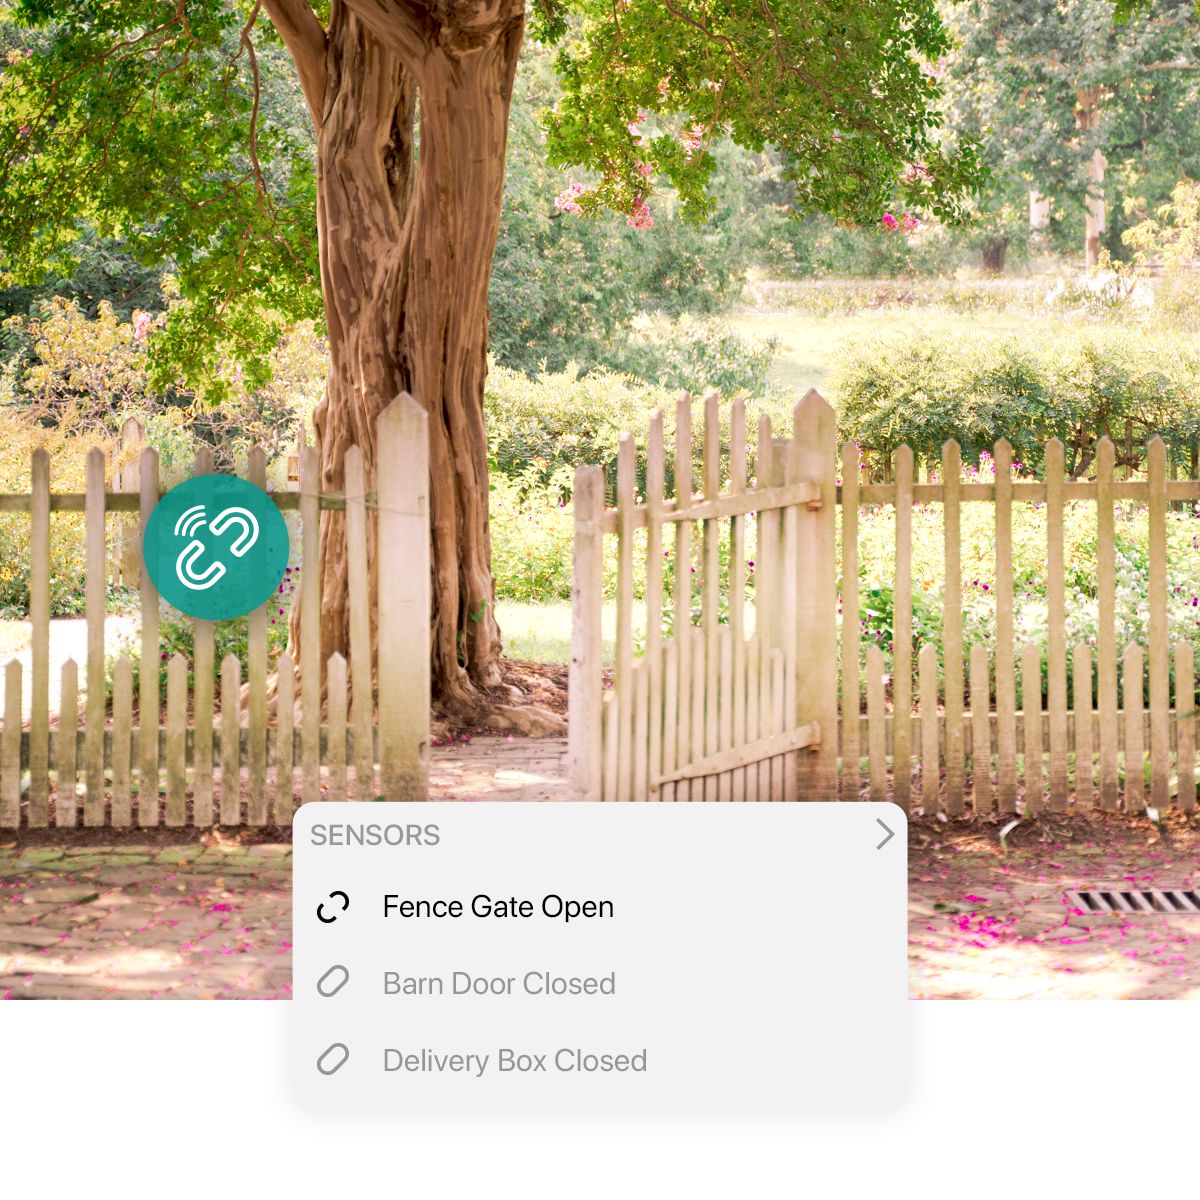 Receive notification in real time when your fence gate is opened 